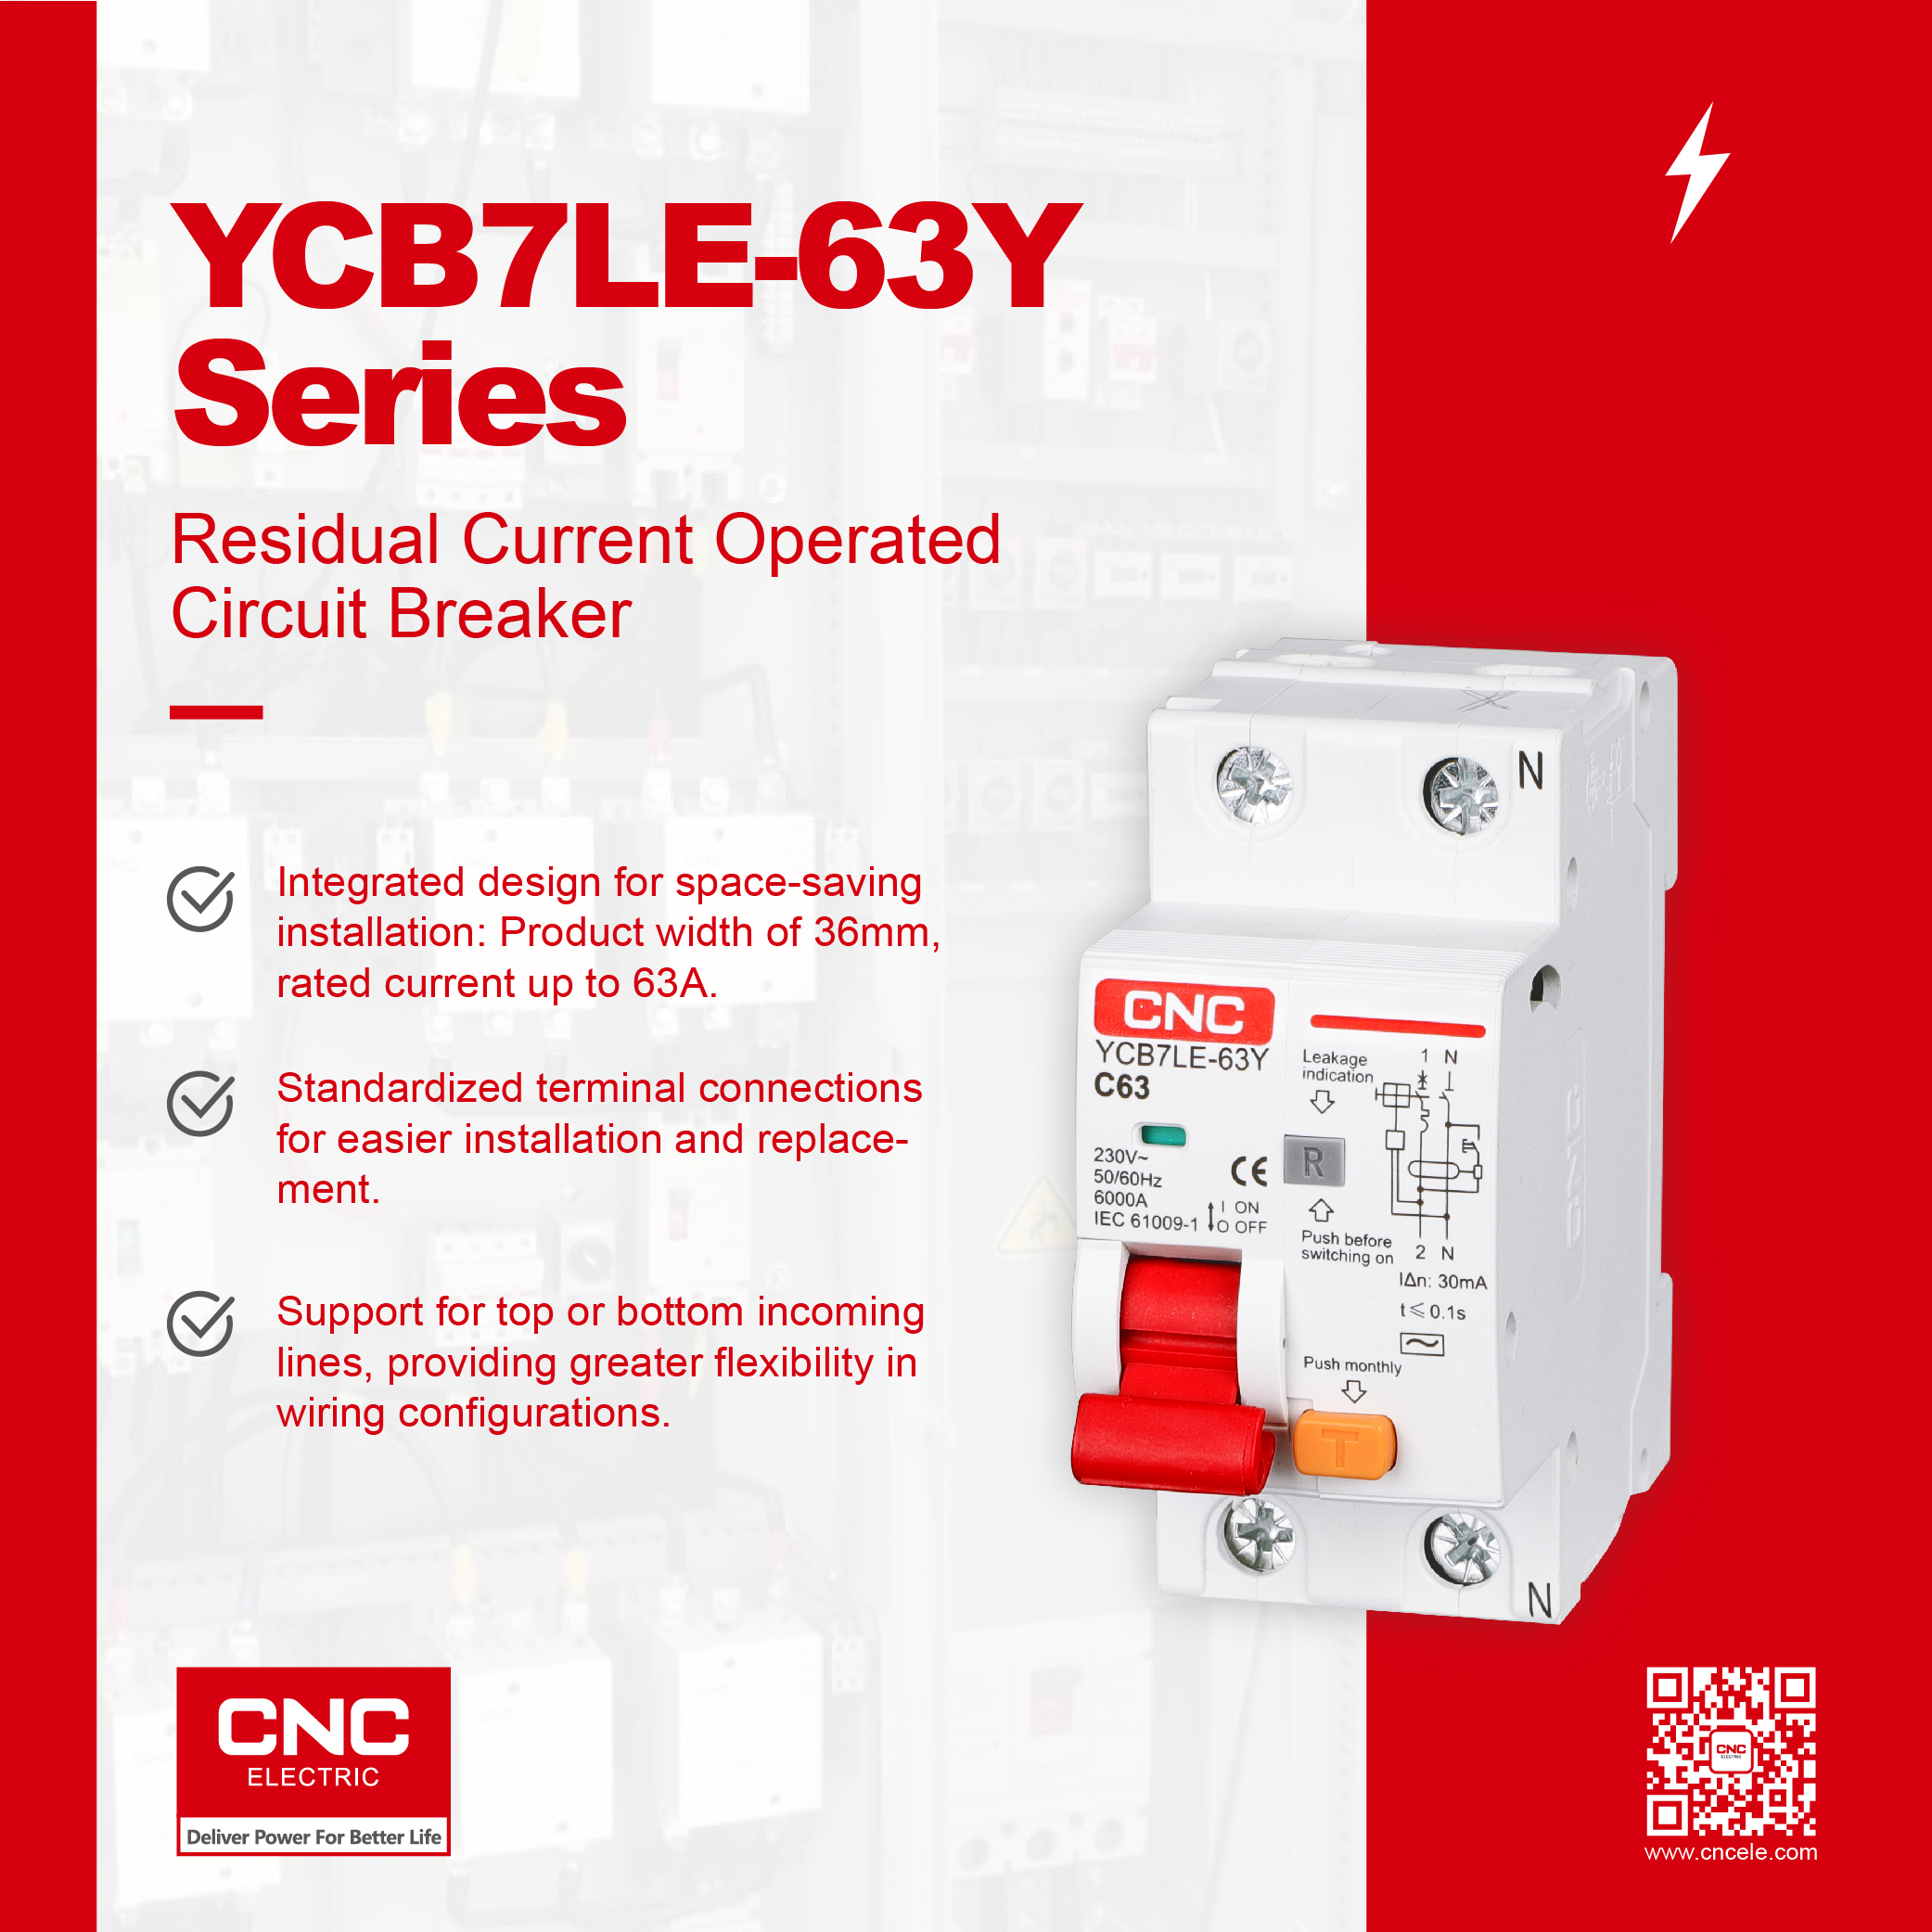 CNC | YCB7LE-63Y Series Residual Current Circuit Breaker